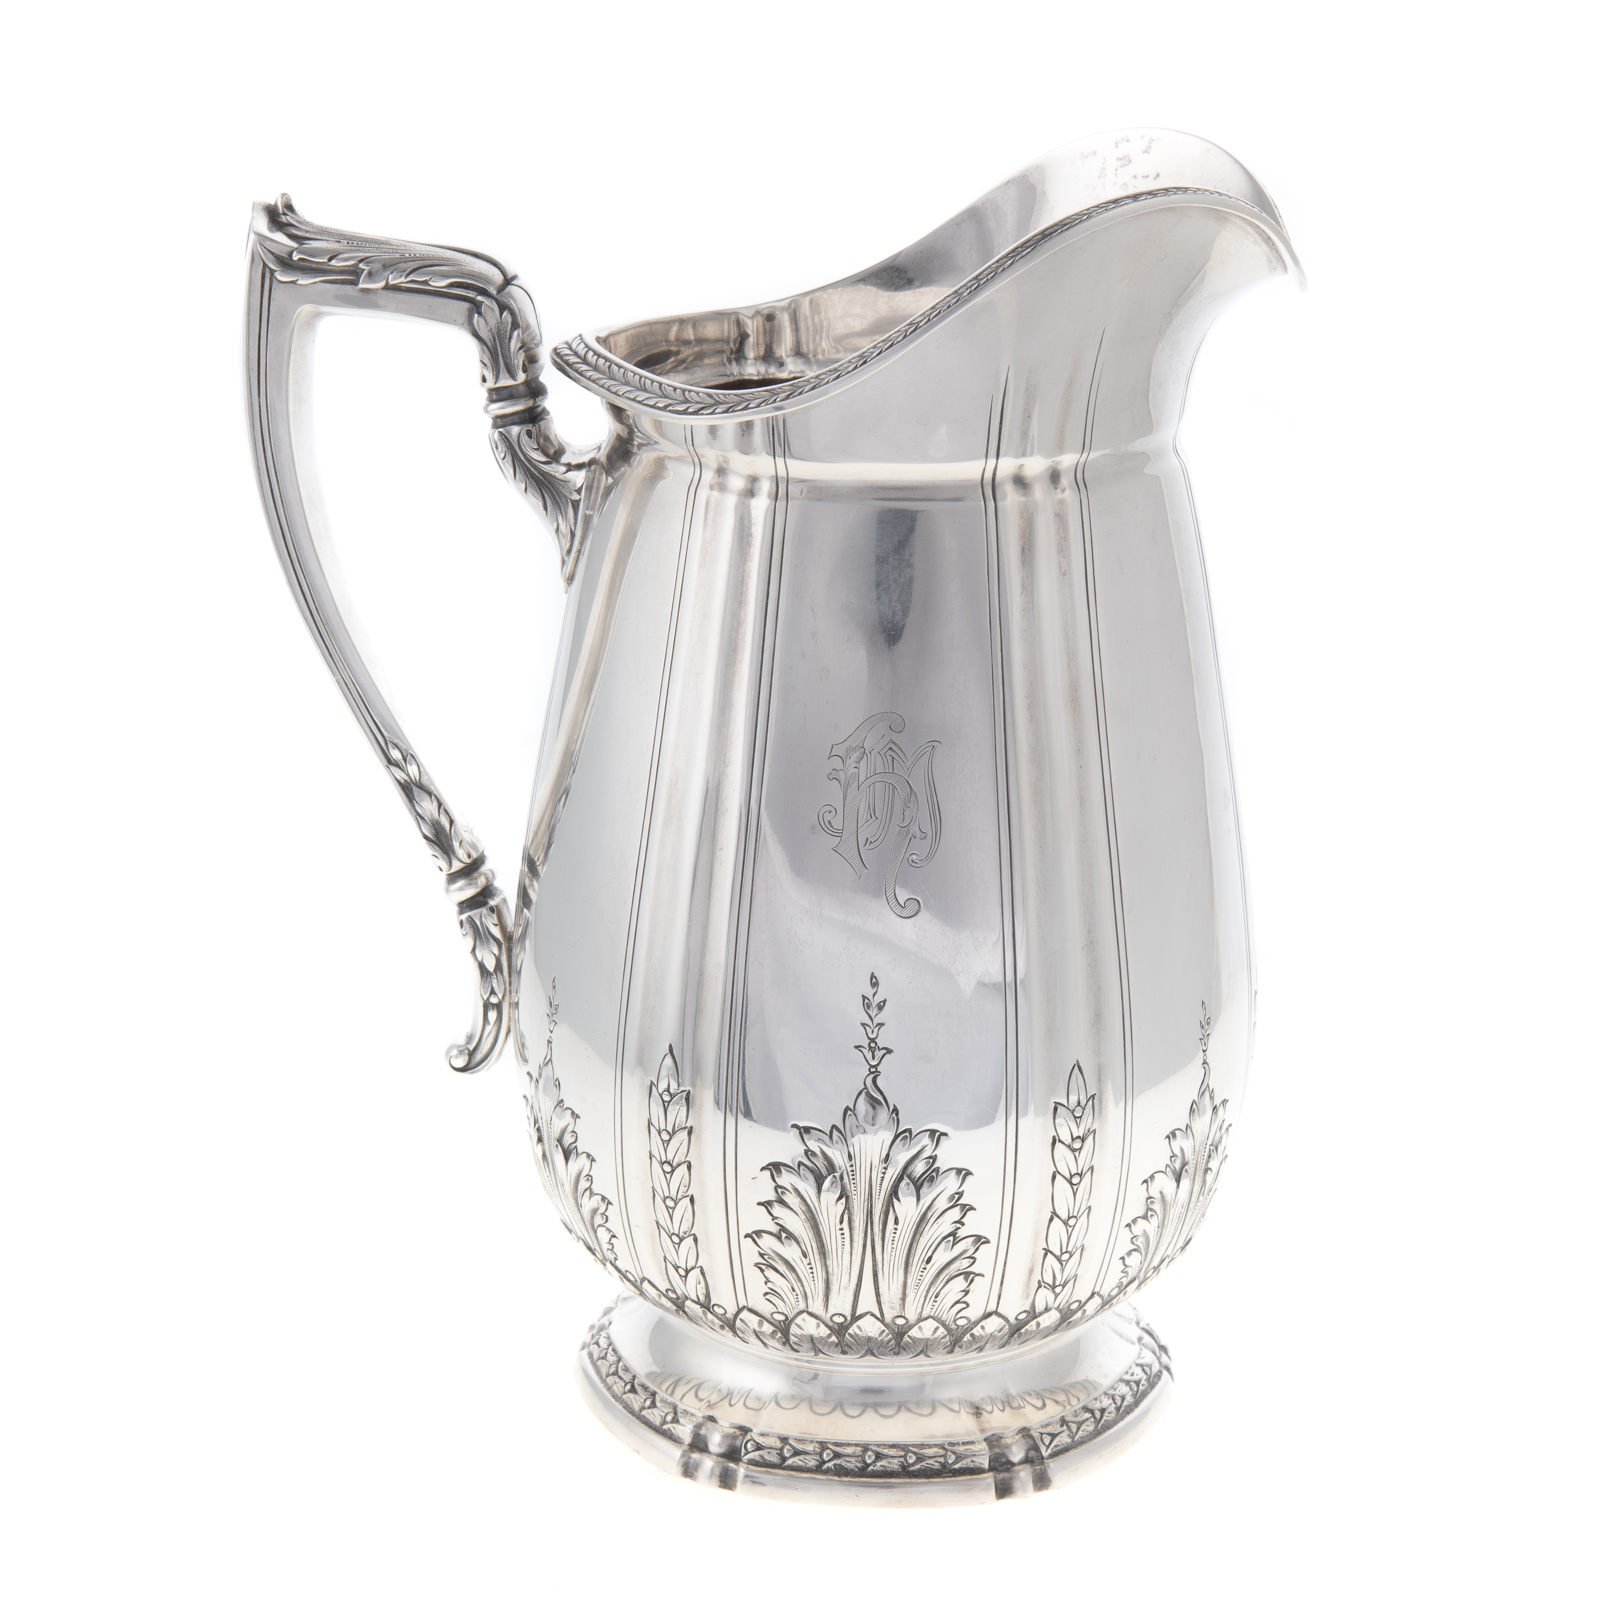 REED & BARTON STERLING WATER PITCHER